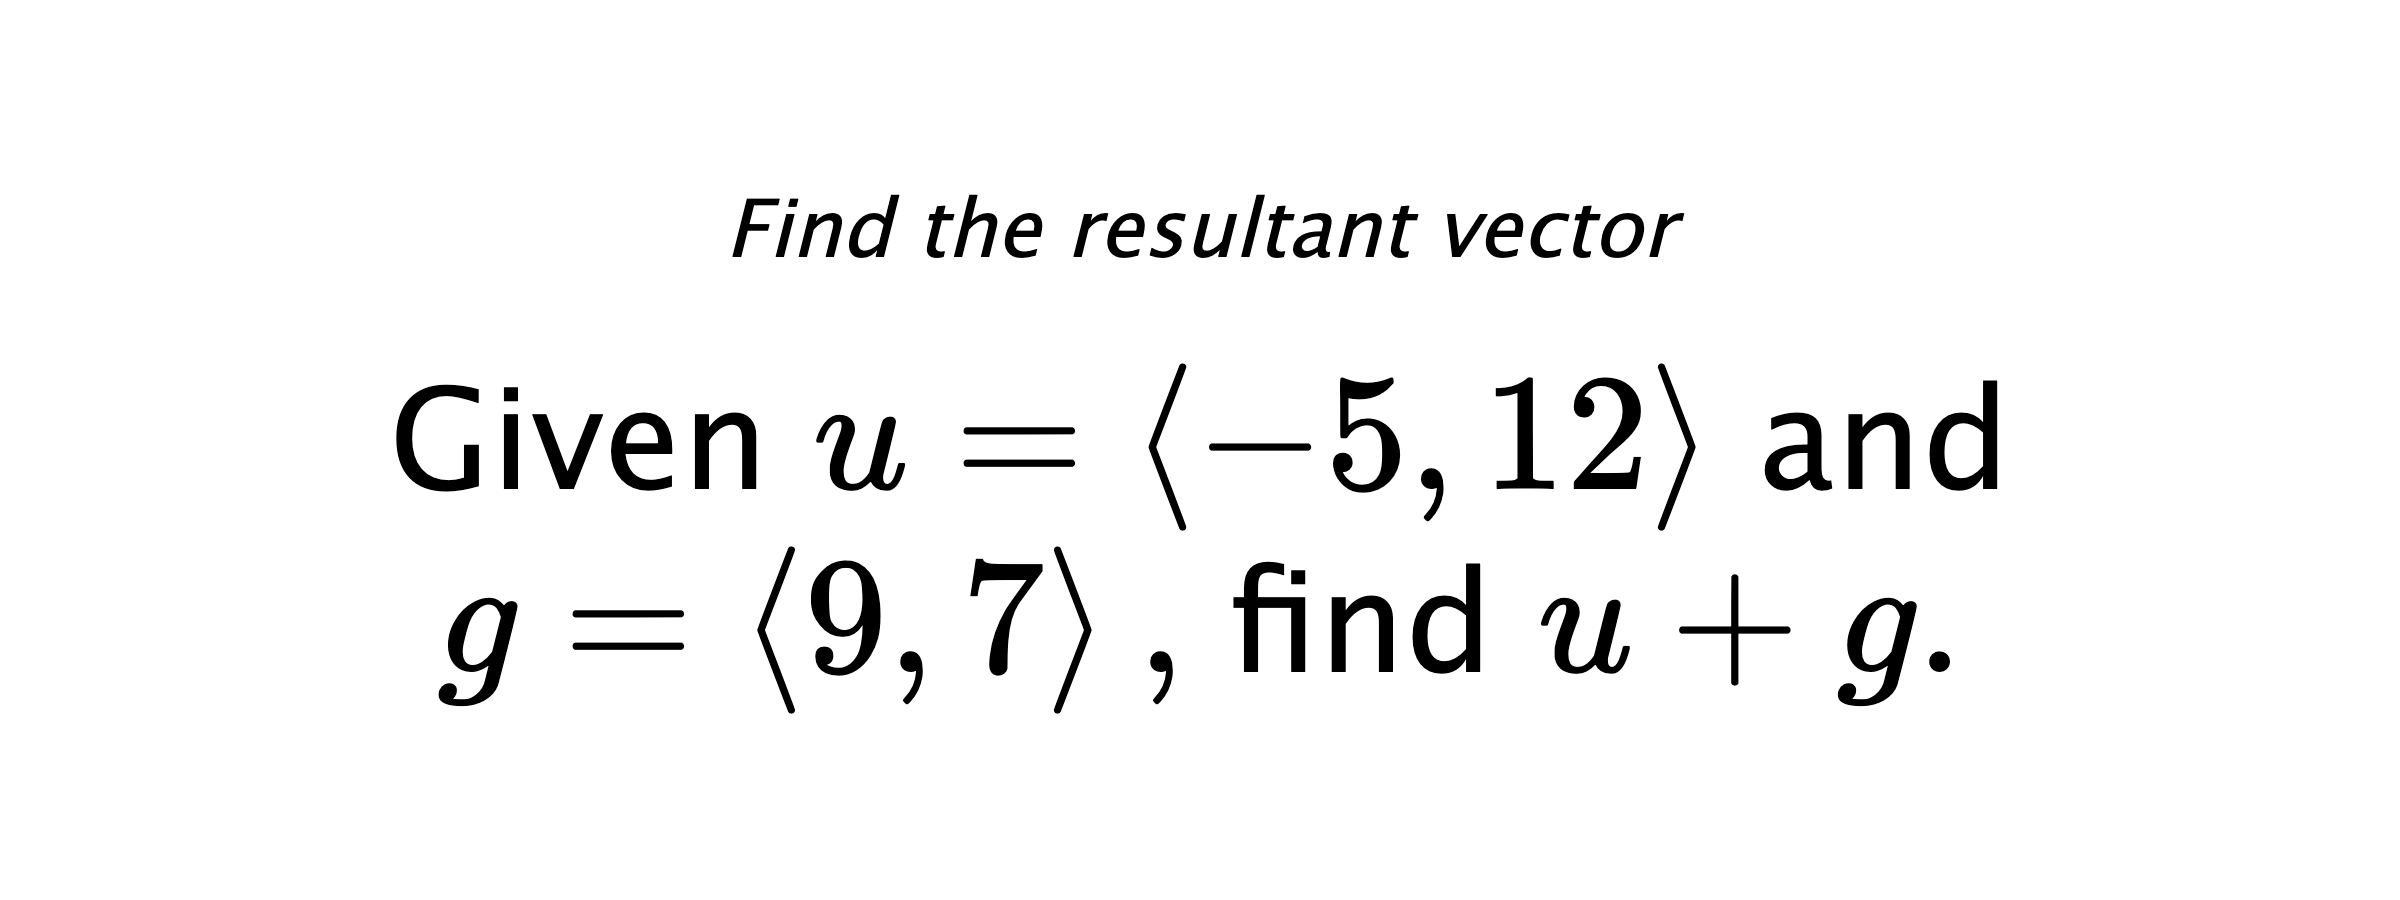 Find the resultant vector Given $ u = \left< -5,12 \right> $ and $ g = \left< 9,7 \right> ,$ find $ u+g .$